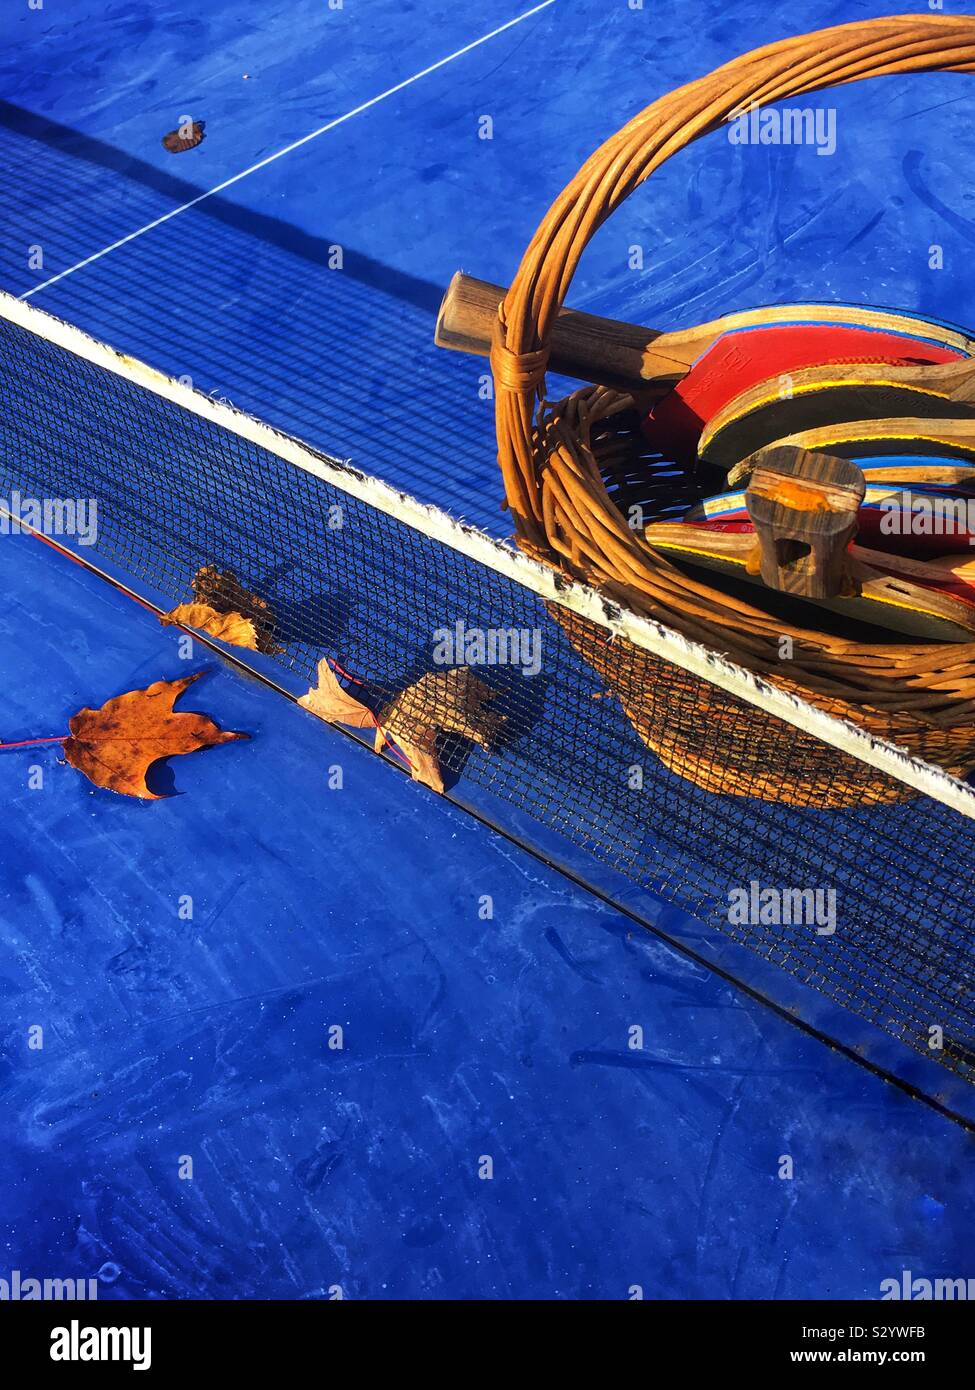 Table tennis aka ping pong outdoors in the autumn. Closeup of blue table, net & paddles Stock Photo